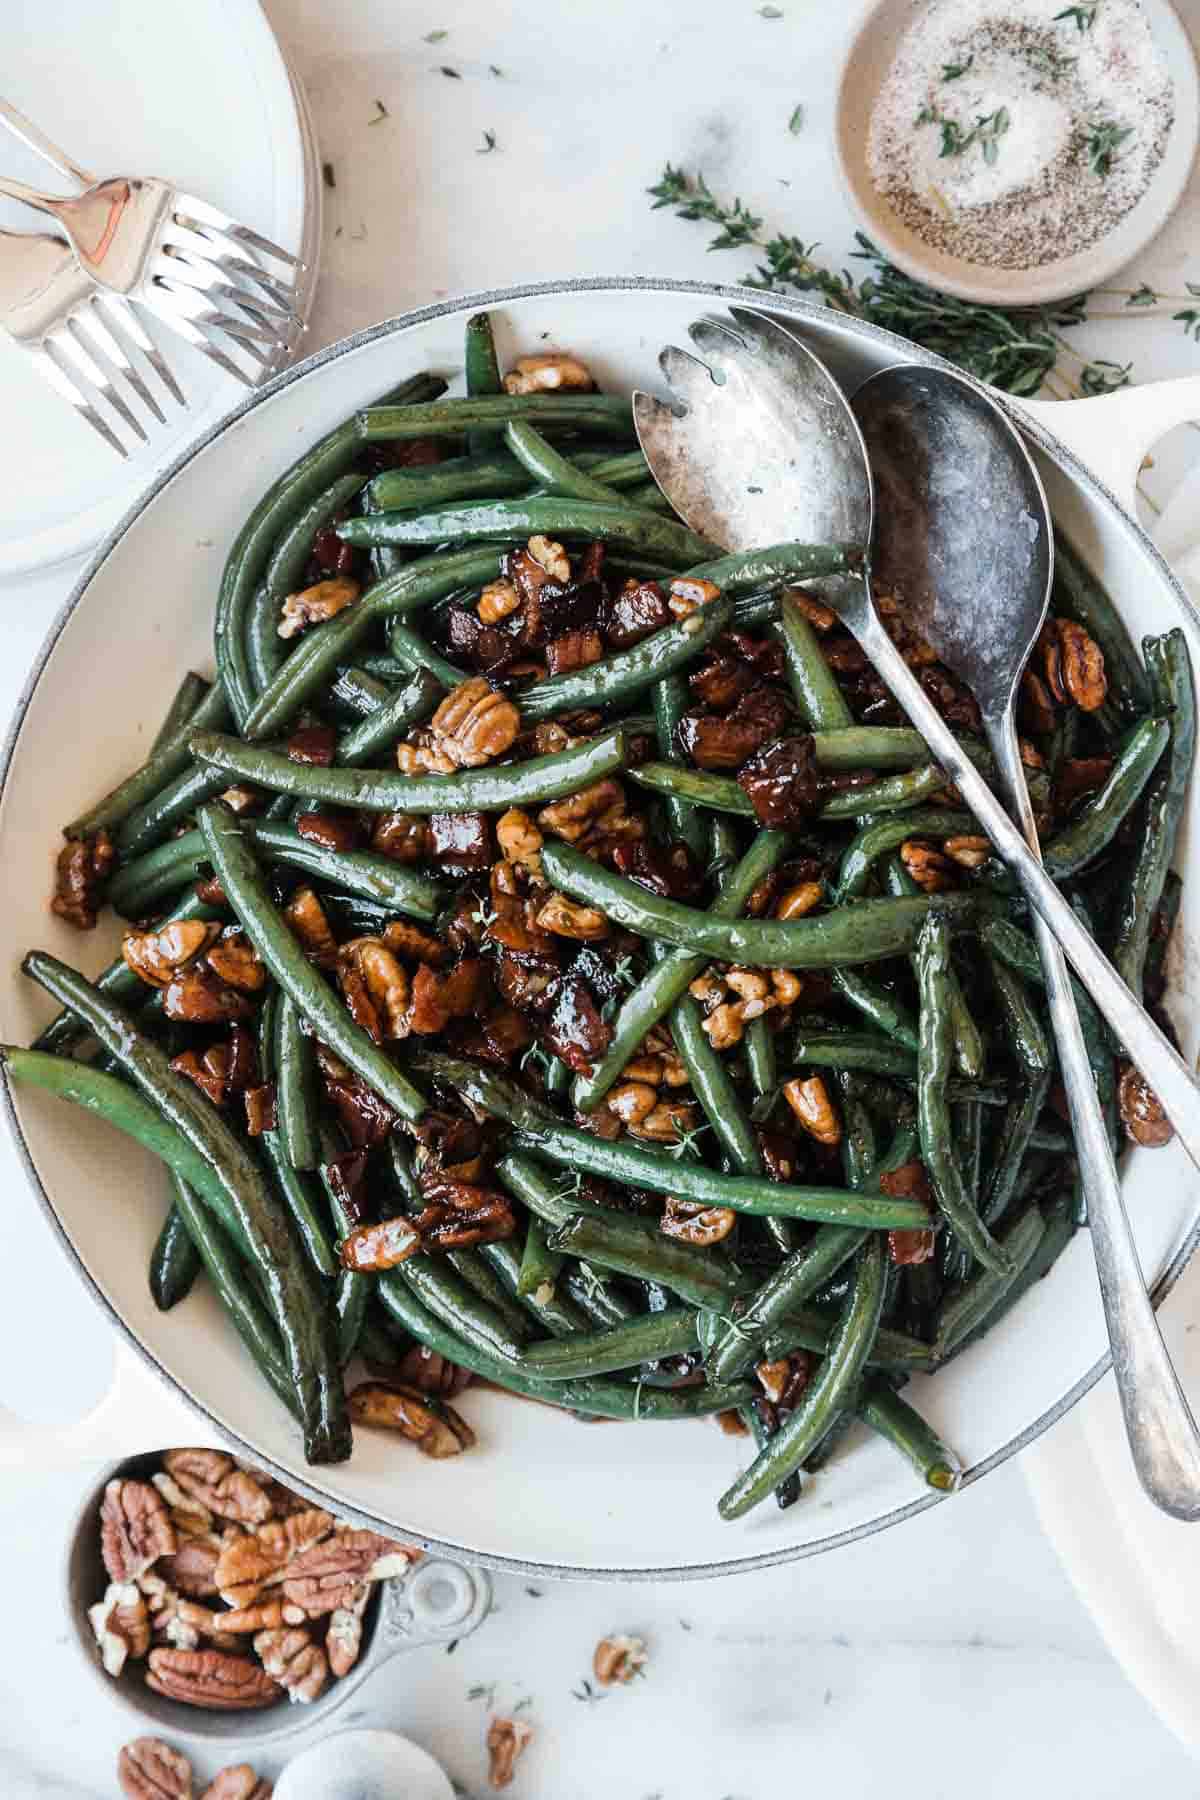 An overhead shot of green beans and bacon in a white braised. There is a small bowl of pecans on one corner and a small bowl of salt and pepper on the oven.